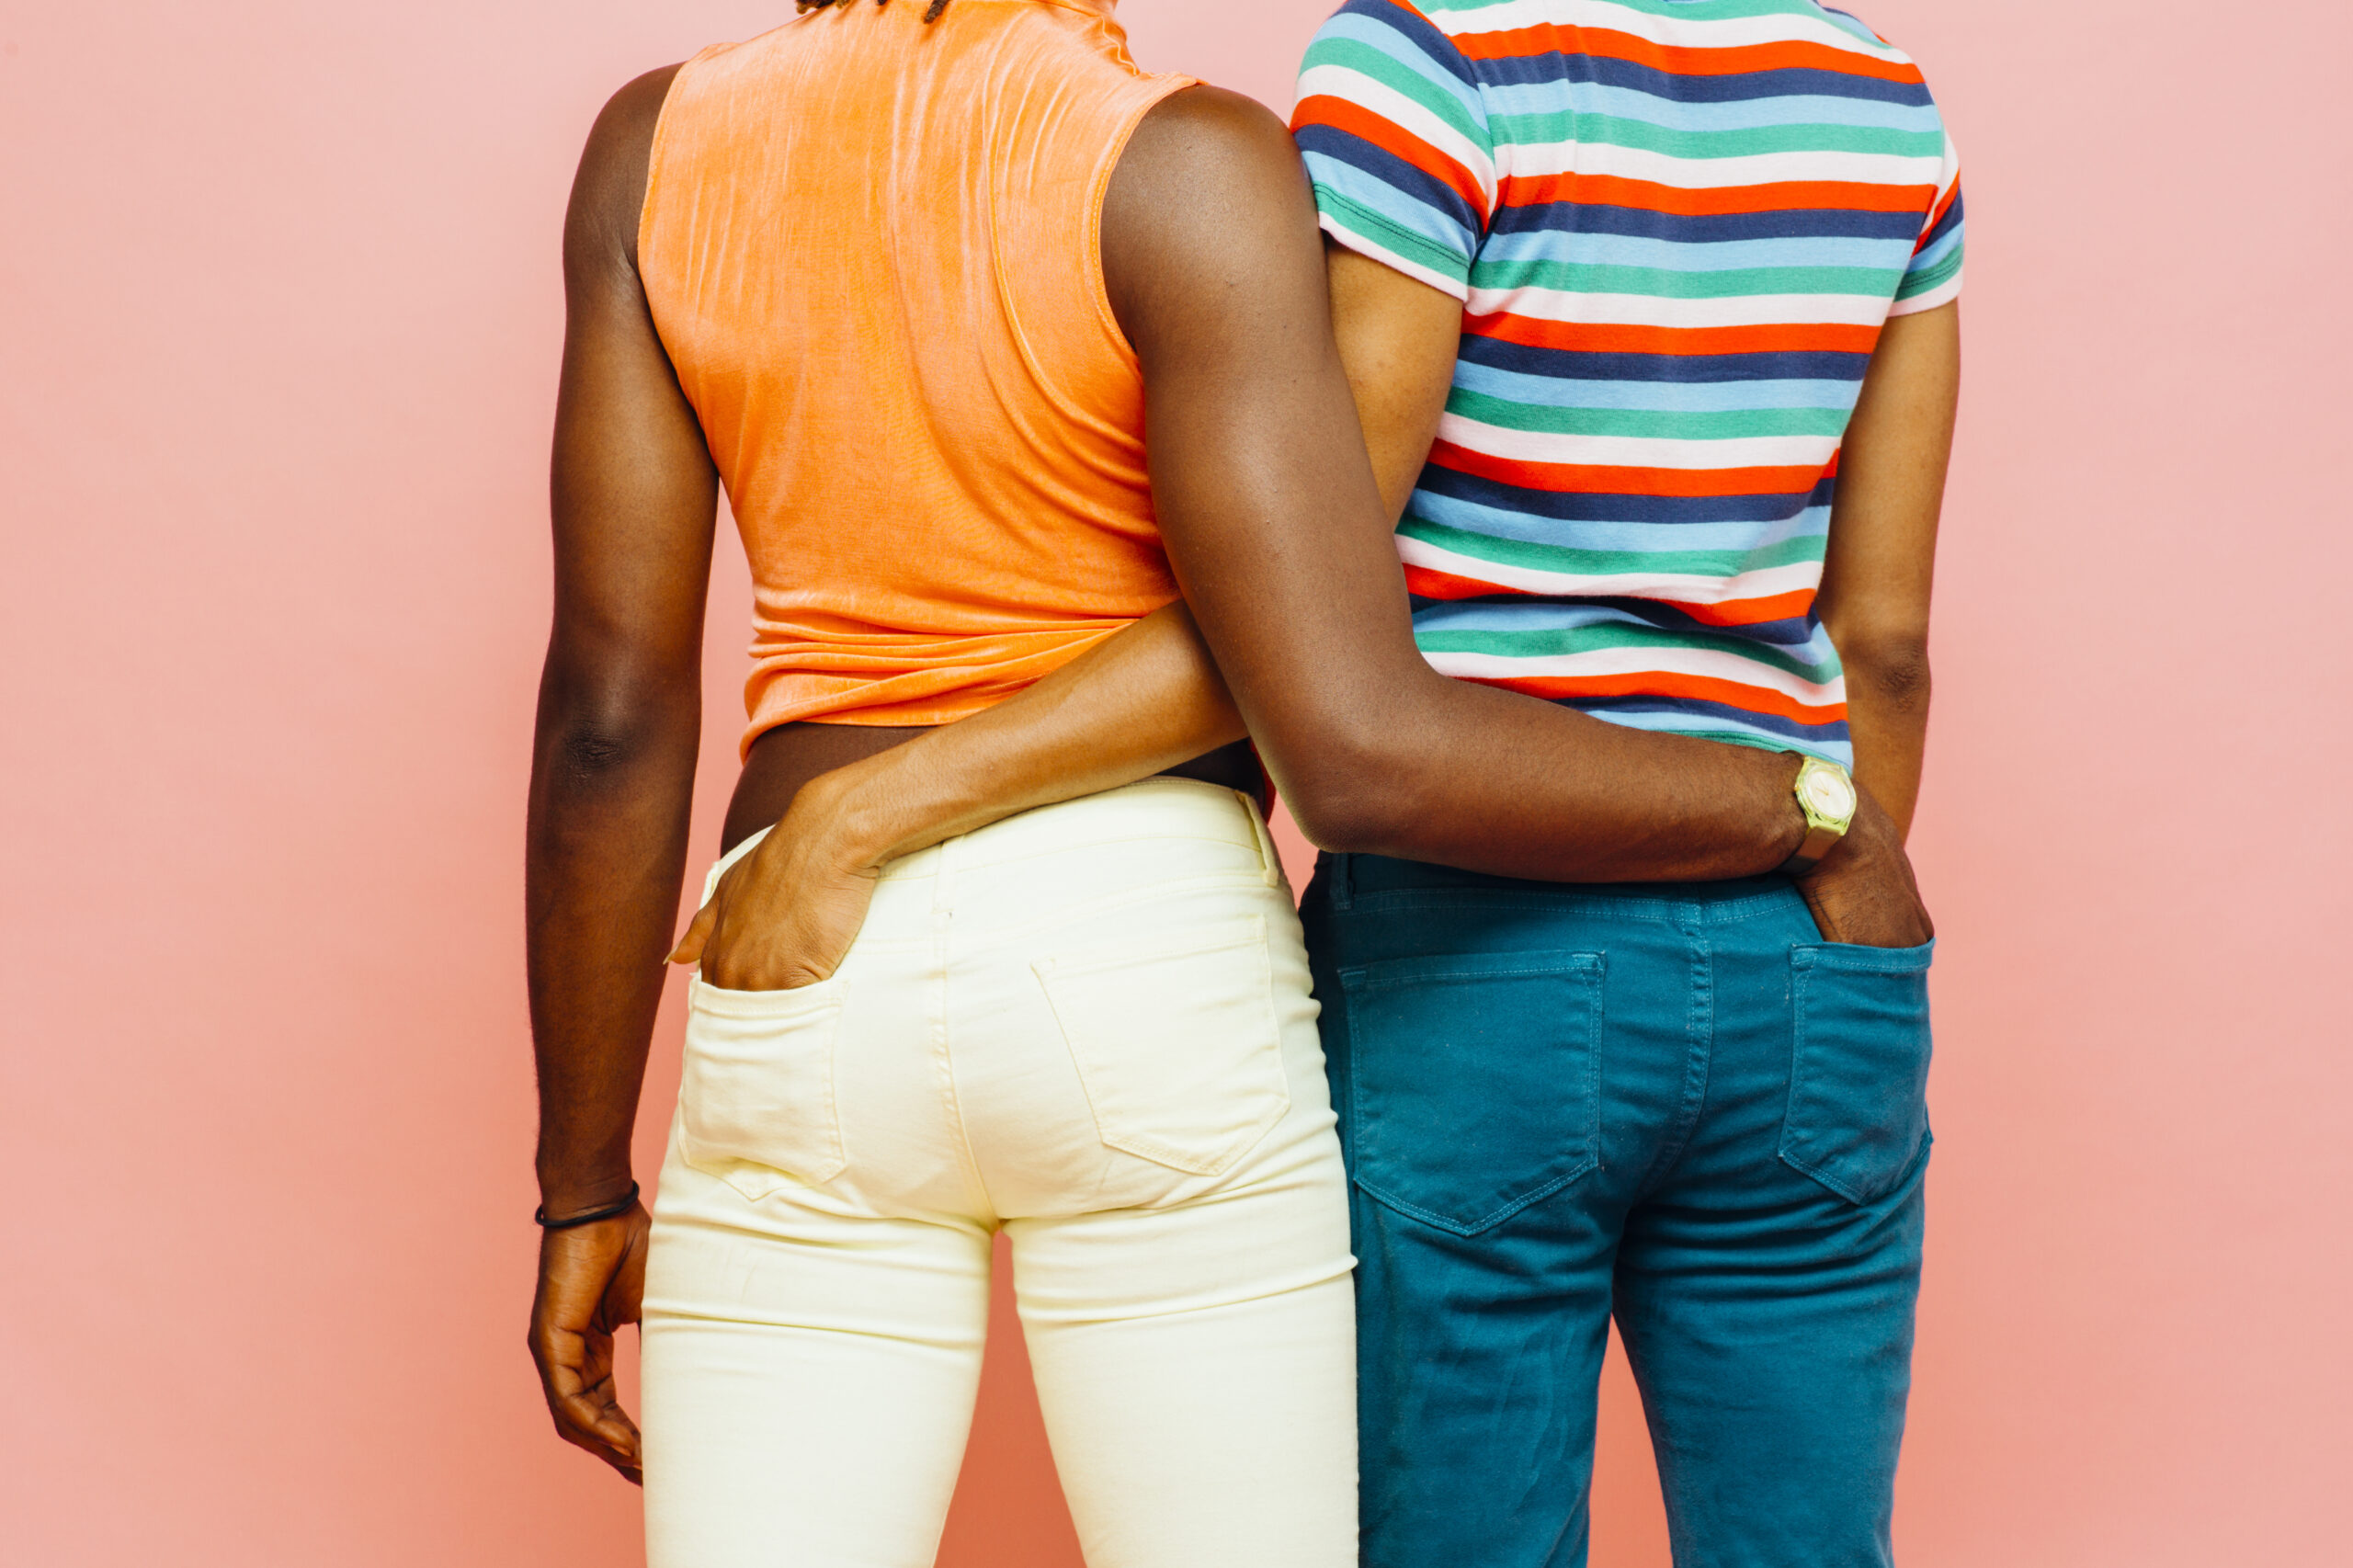 An Intimacy Expert Gave This Advice On Embracing Your Sexuality